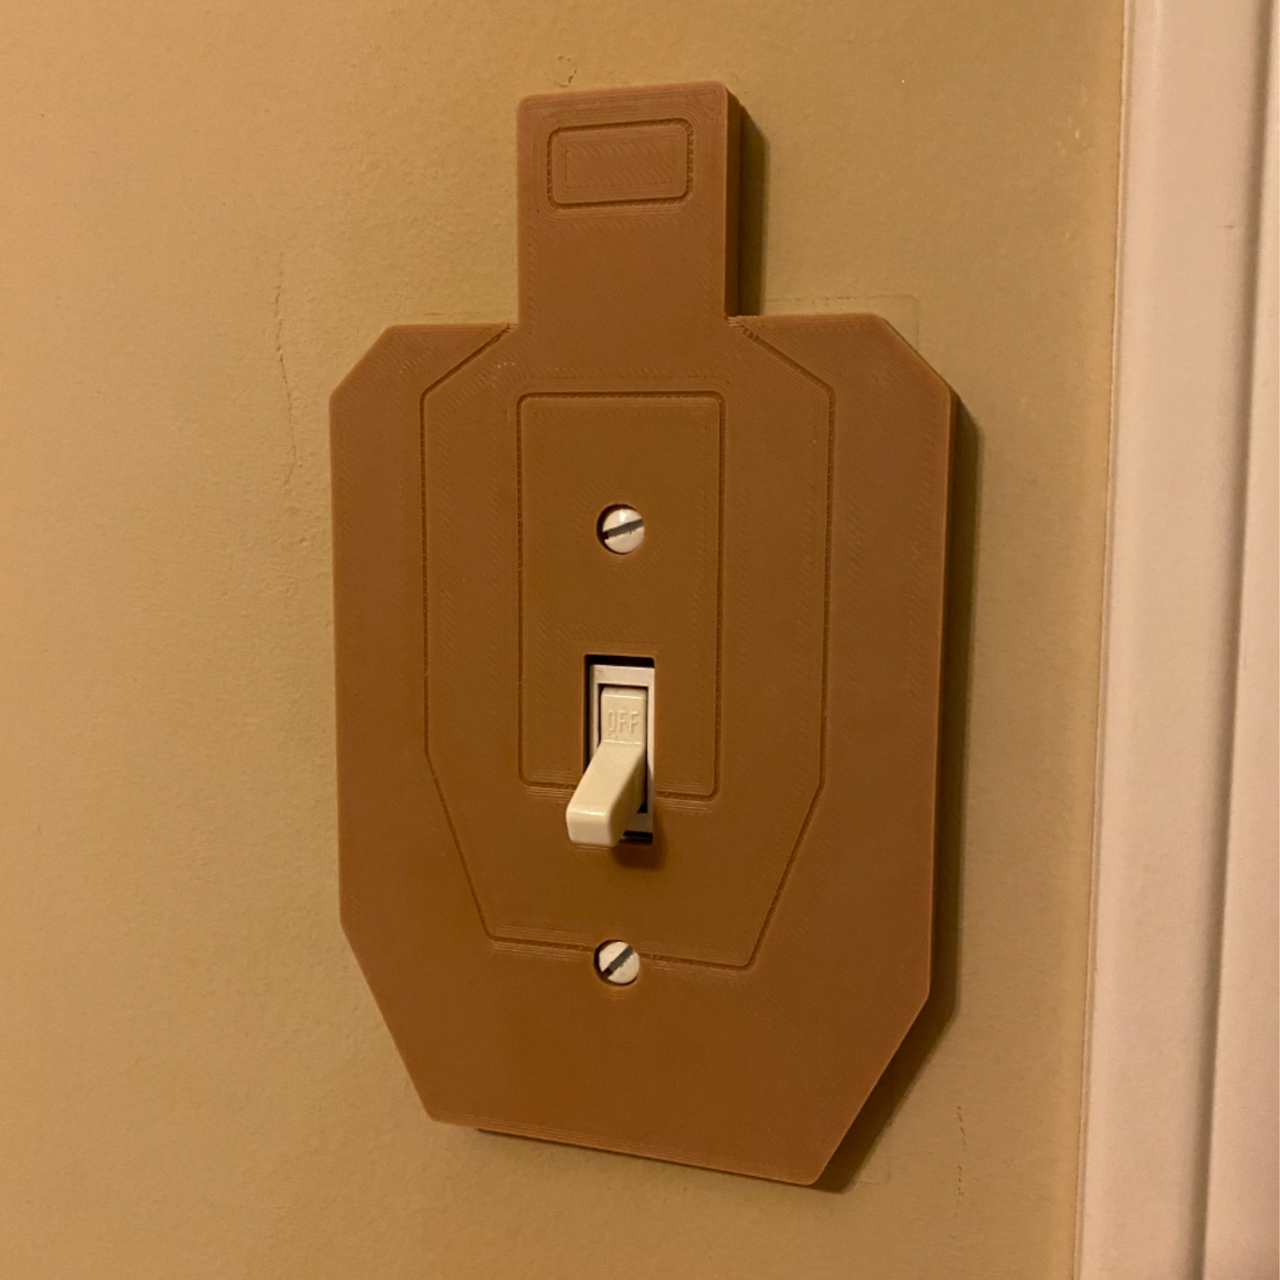 T004 IPSC LIGHT SWITCH COVER - SINGLE